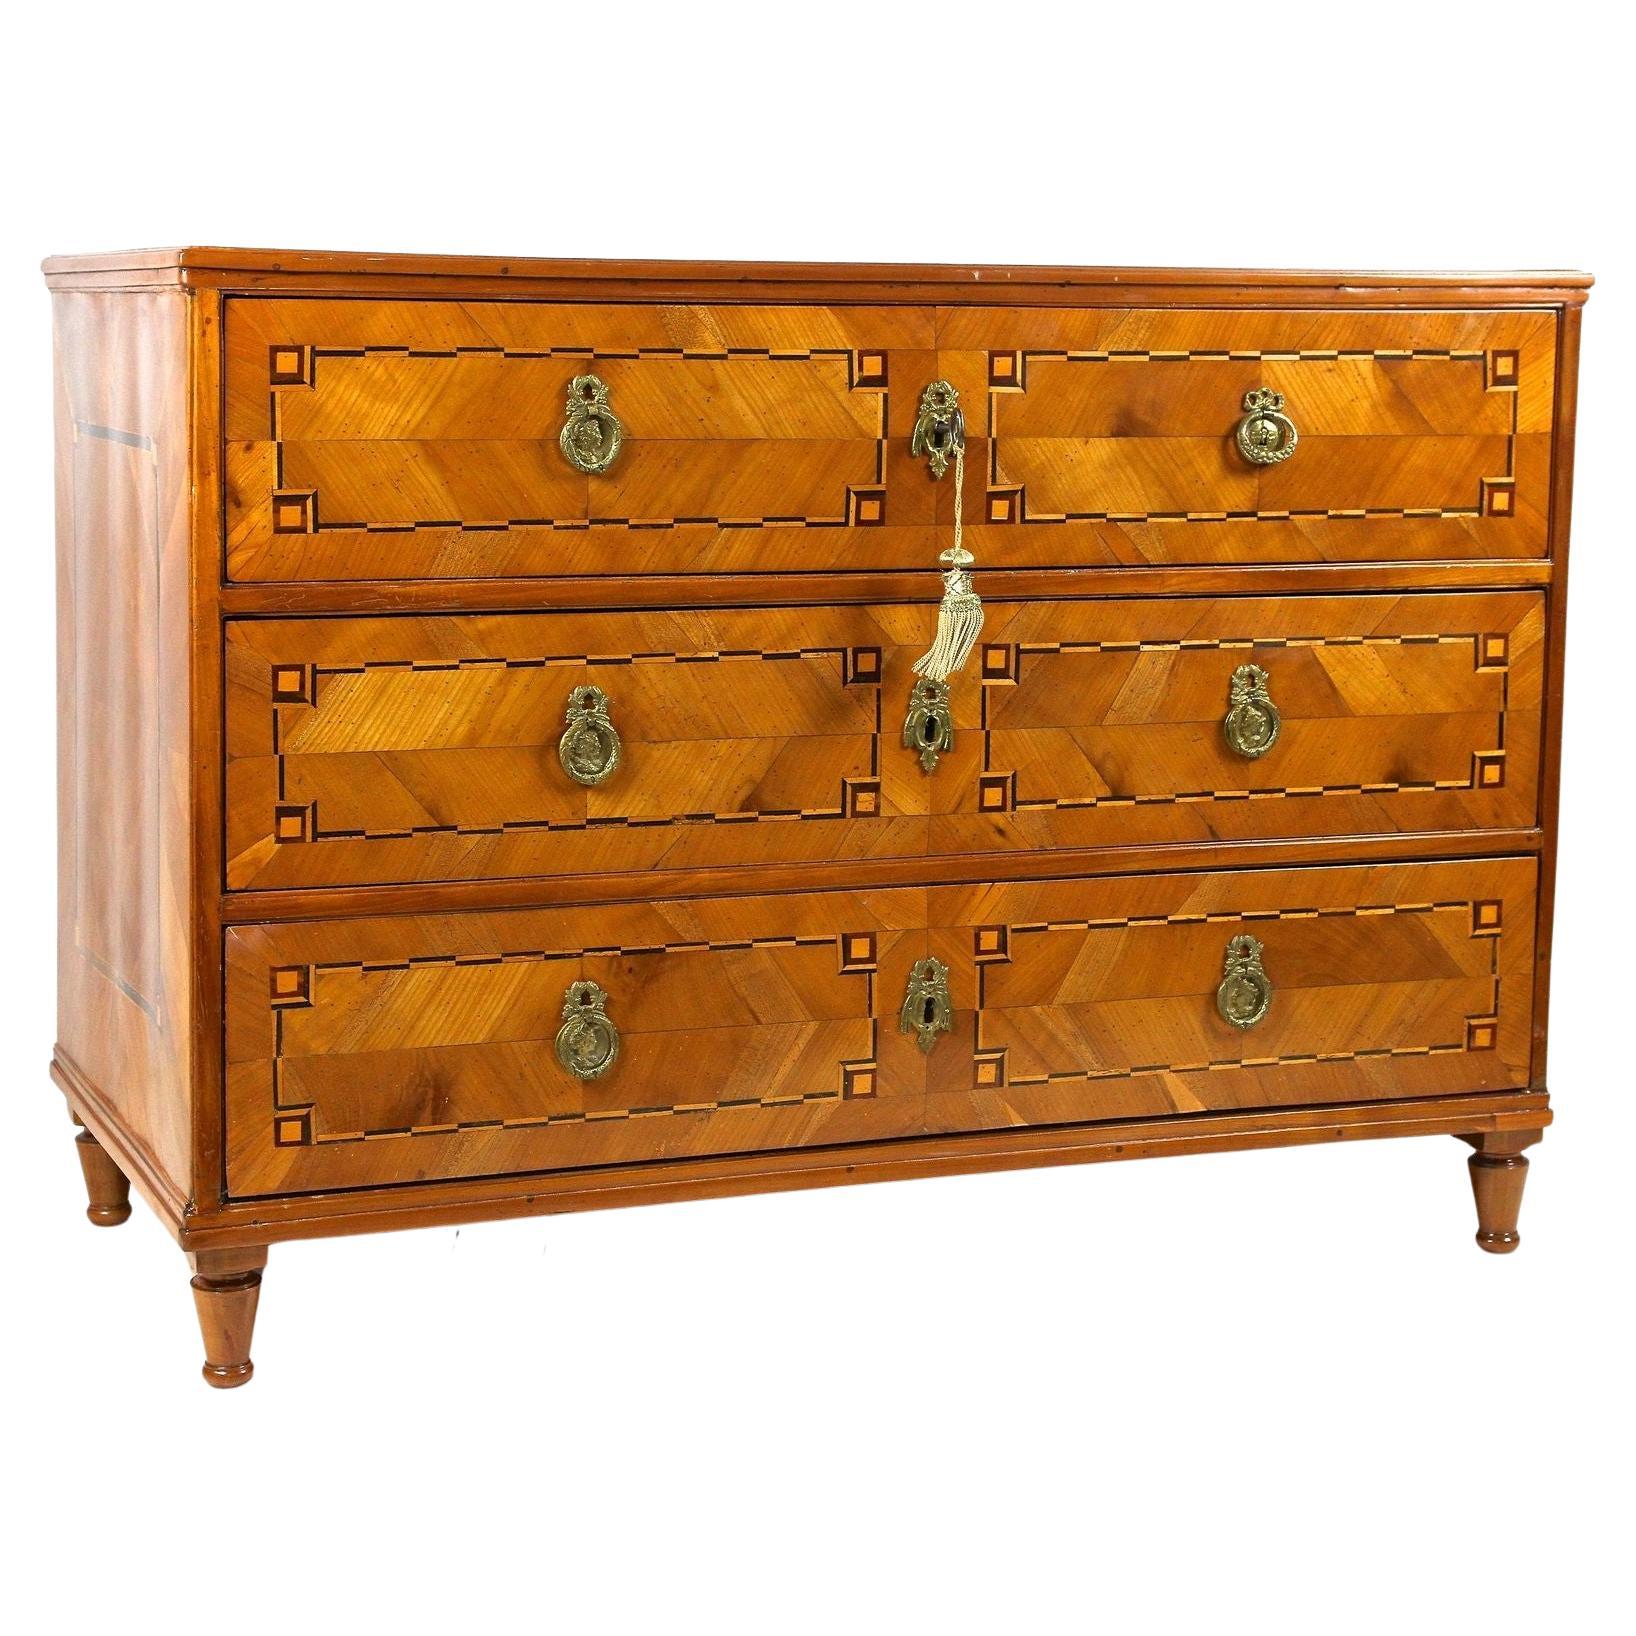 18th Century Cherrywood Chest of Drawers, Josephinism Period, Austria circa 1790 For Sale